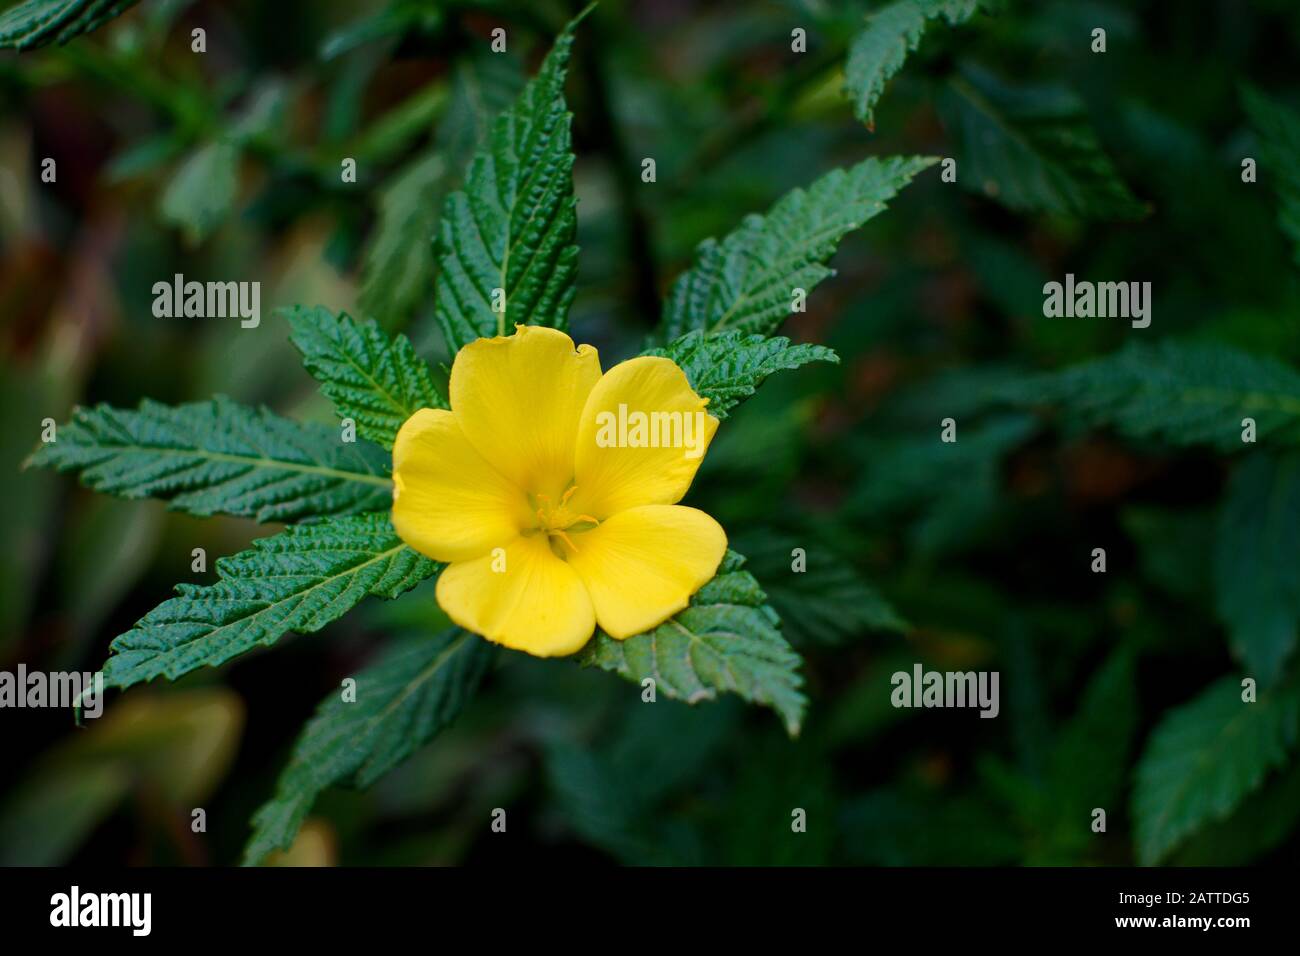 Delicate yellow flower with five petals, green leaves in blurred background. Stock Photo